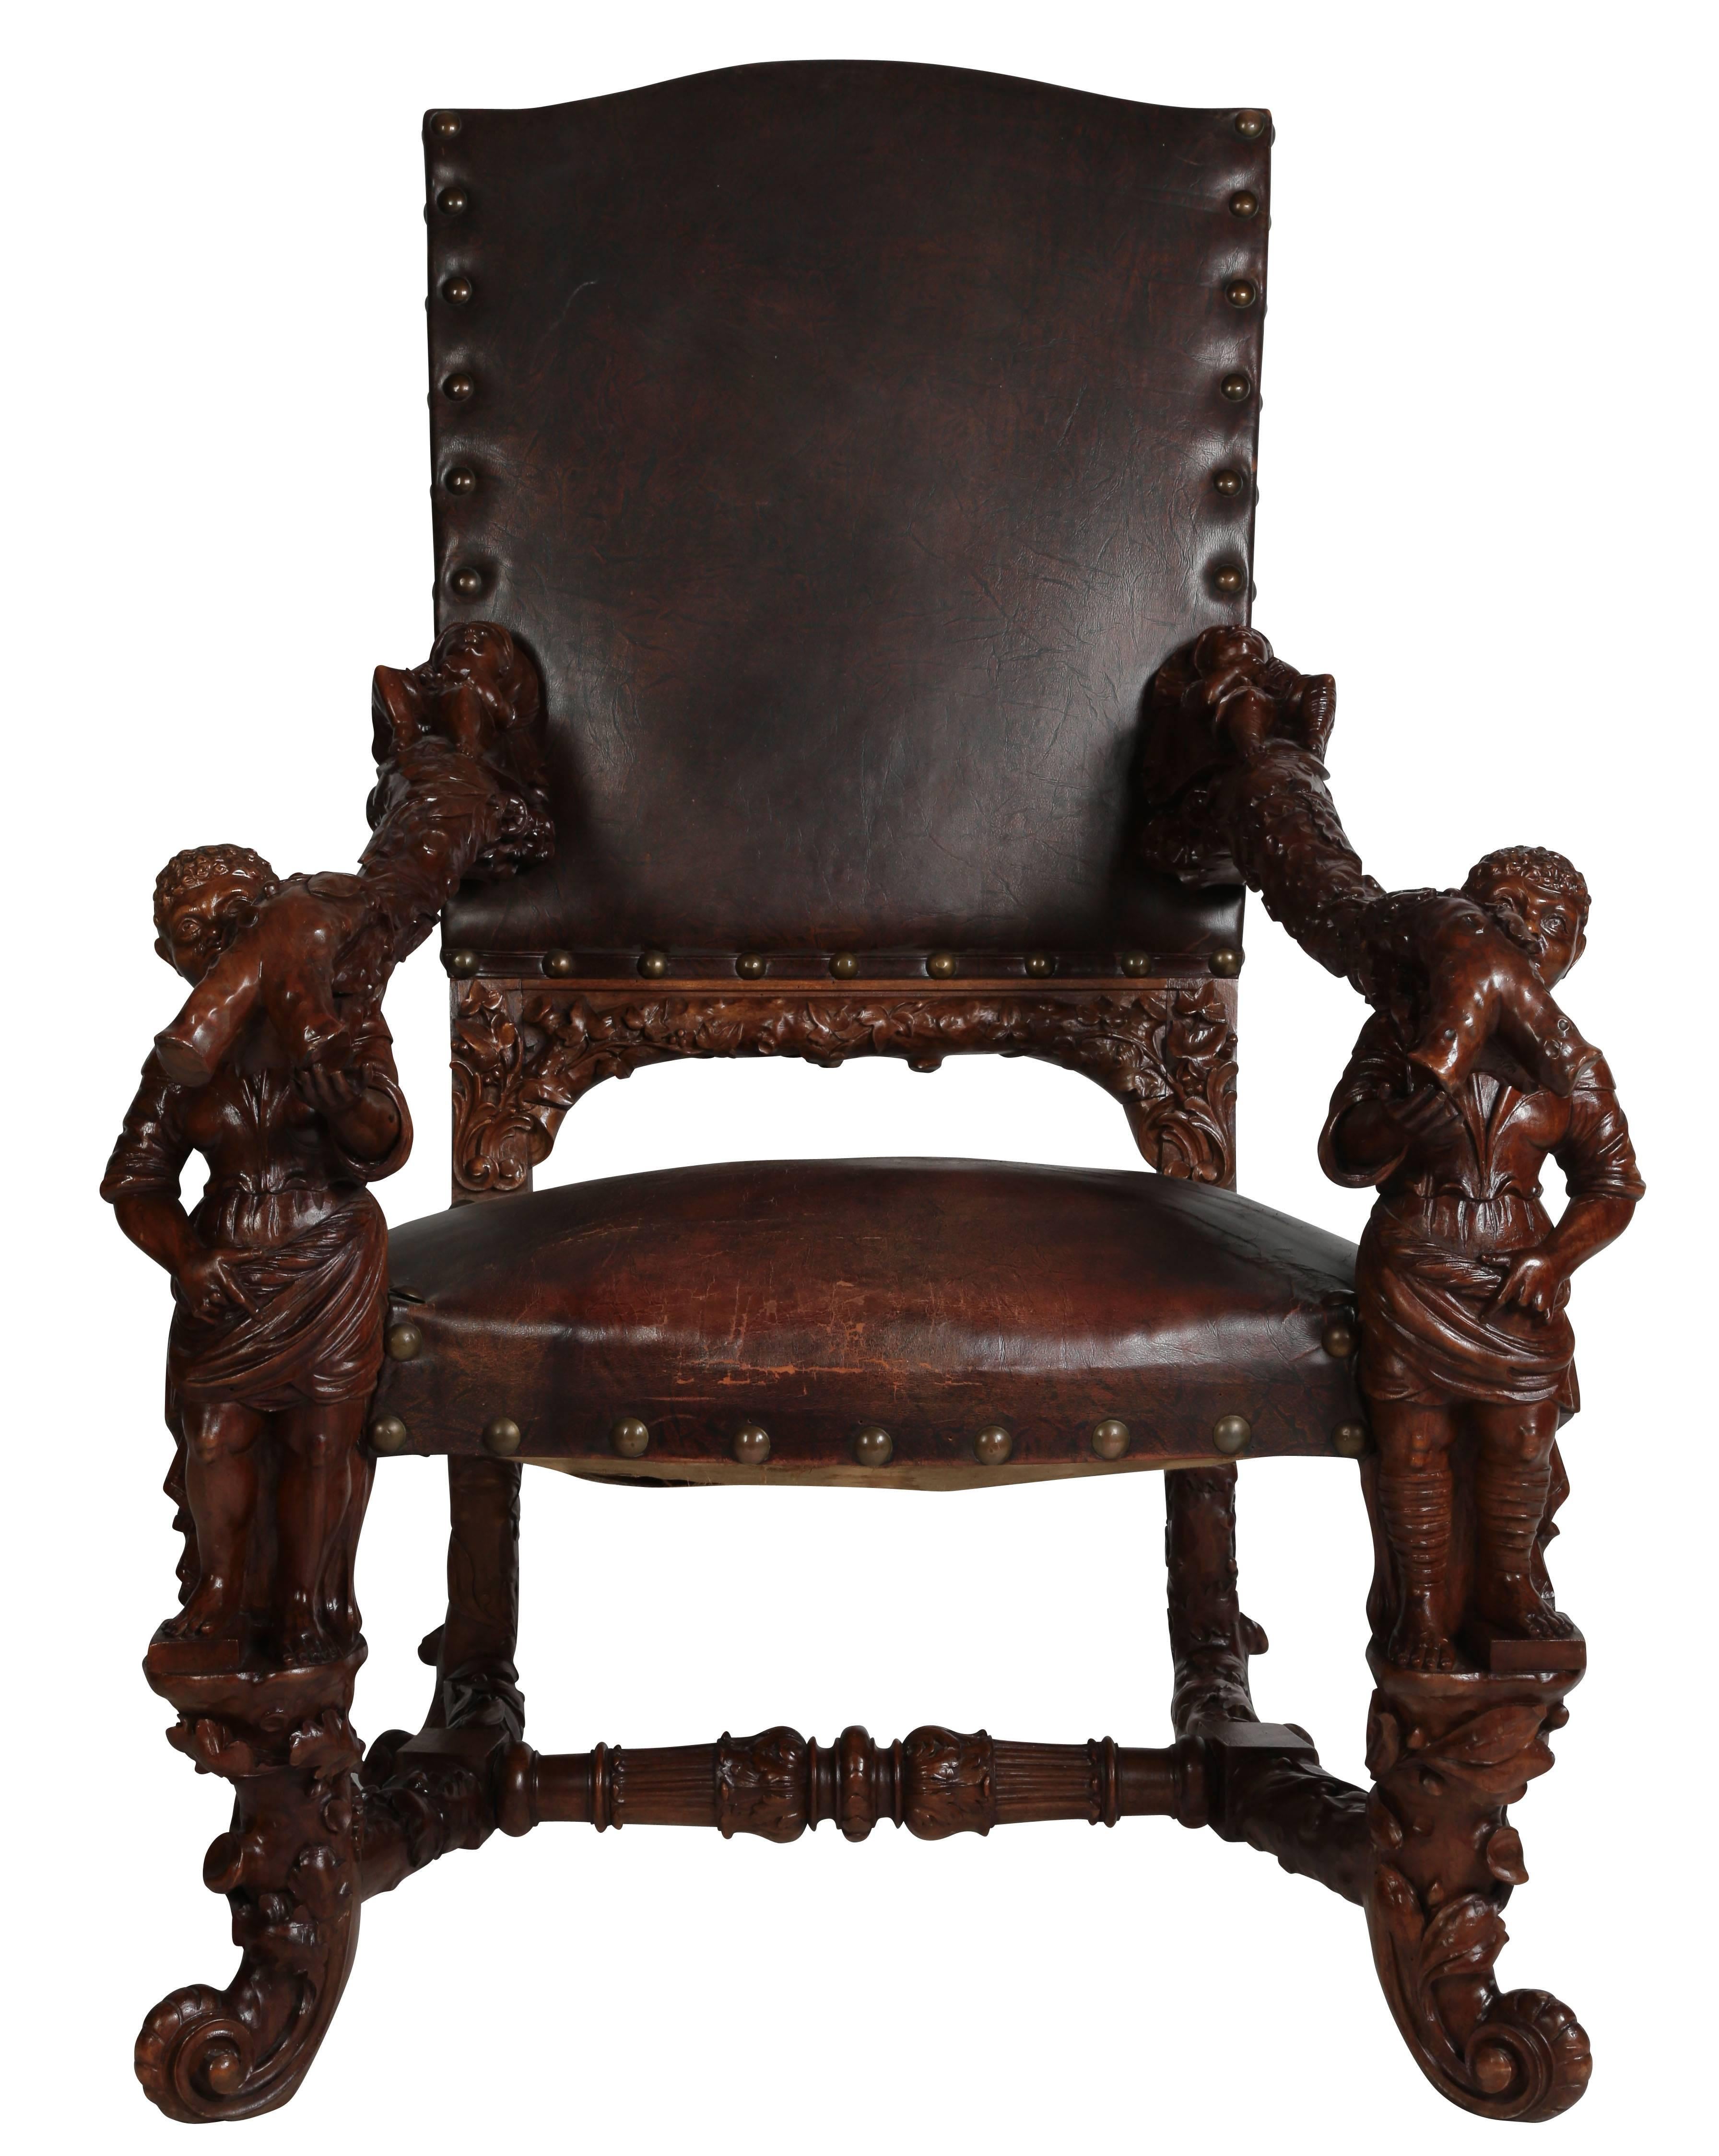 Pair of Palatial Venetian Walnut Carved Mid-19th Century Baroque Figural Thrones For Sale 2